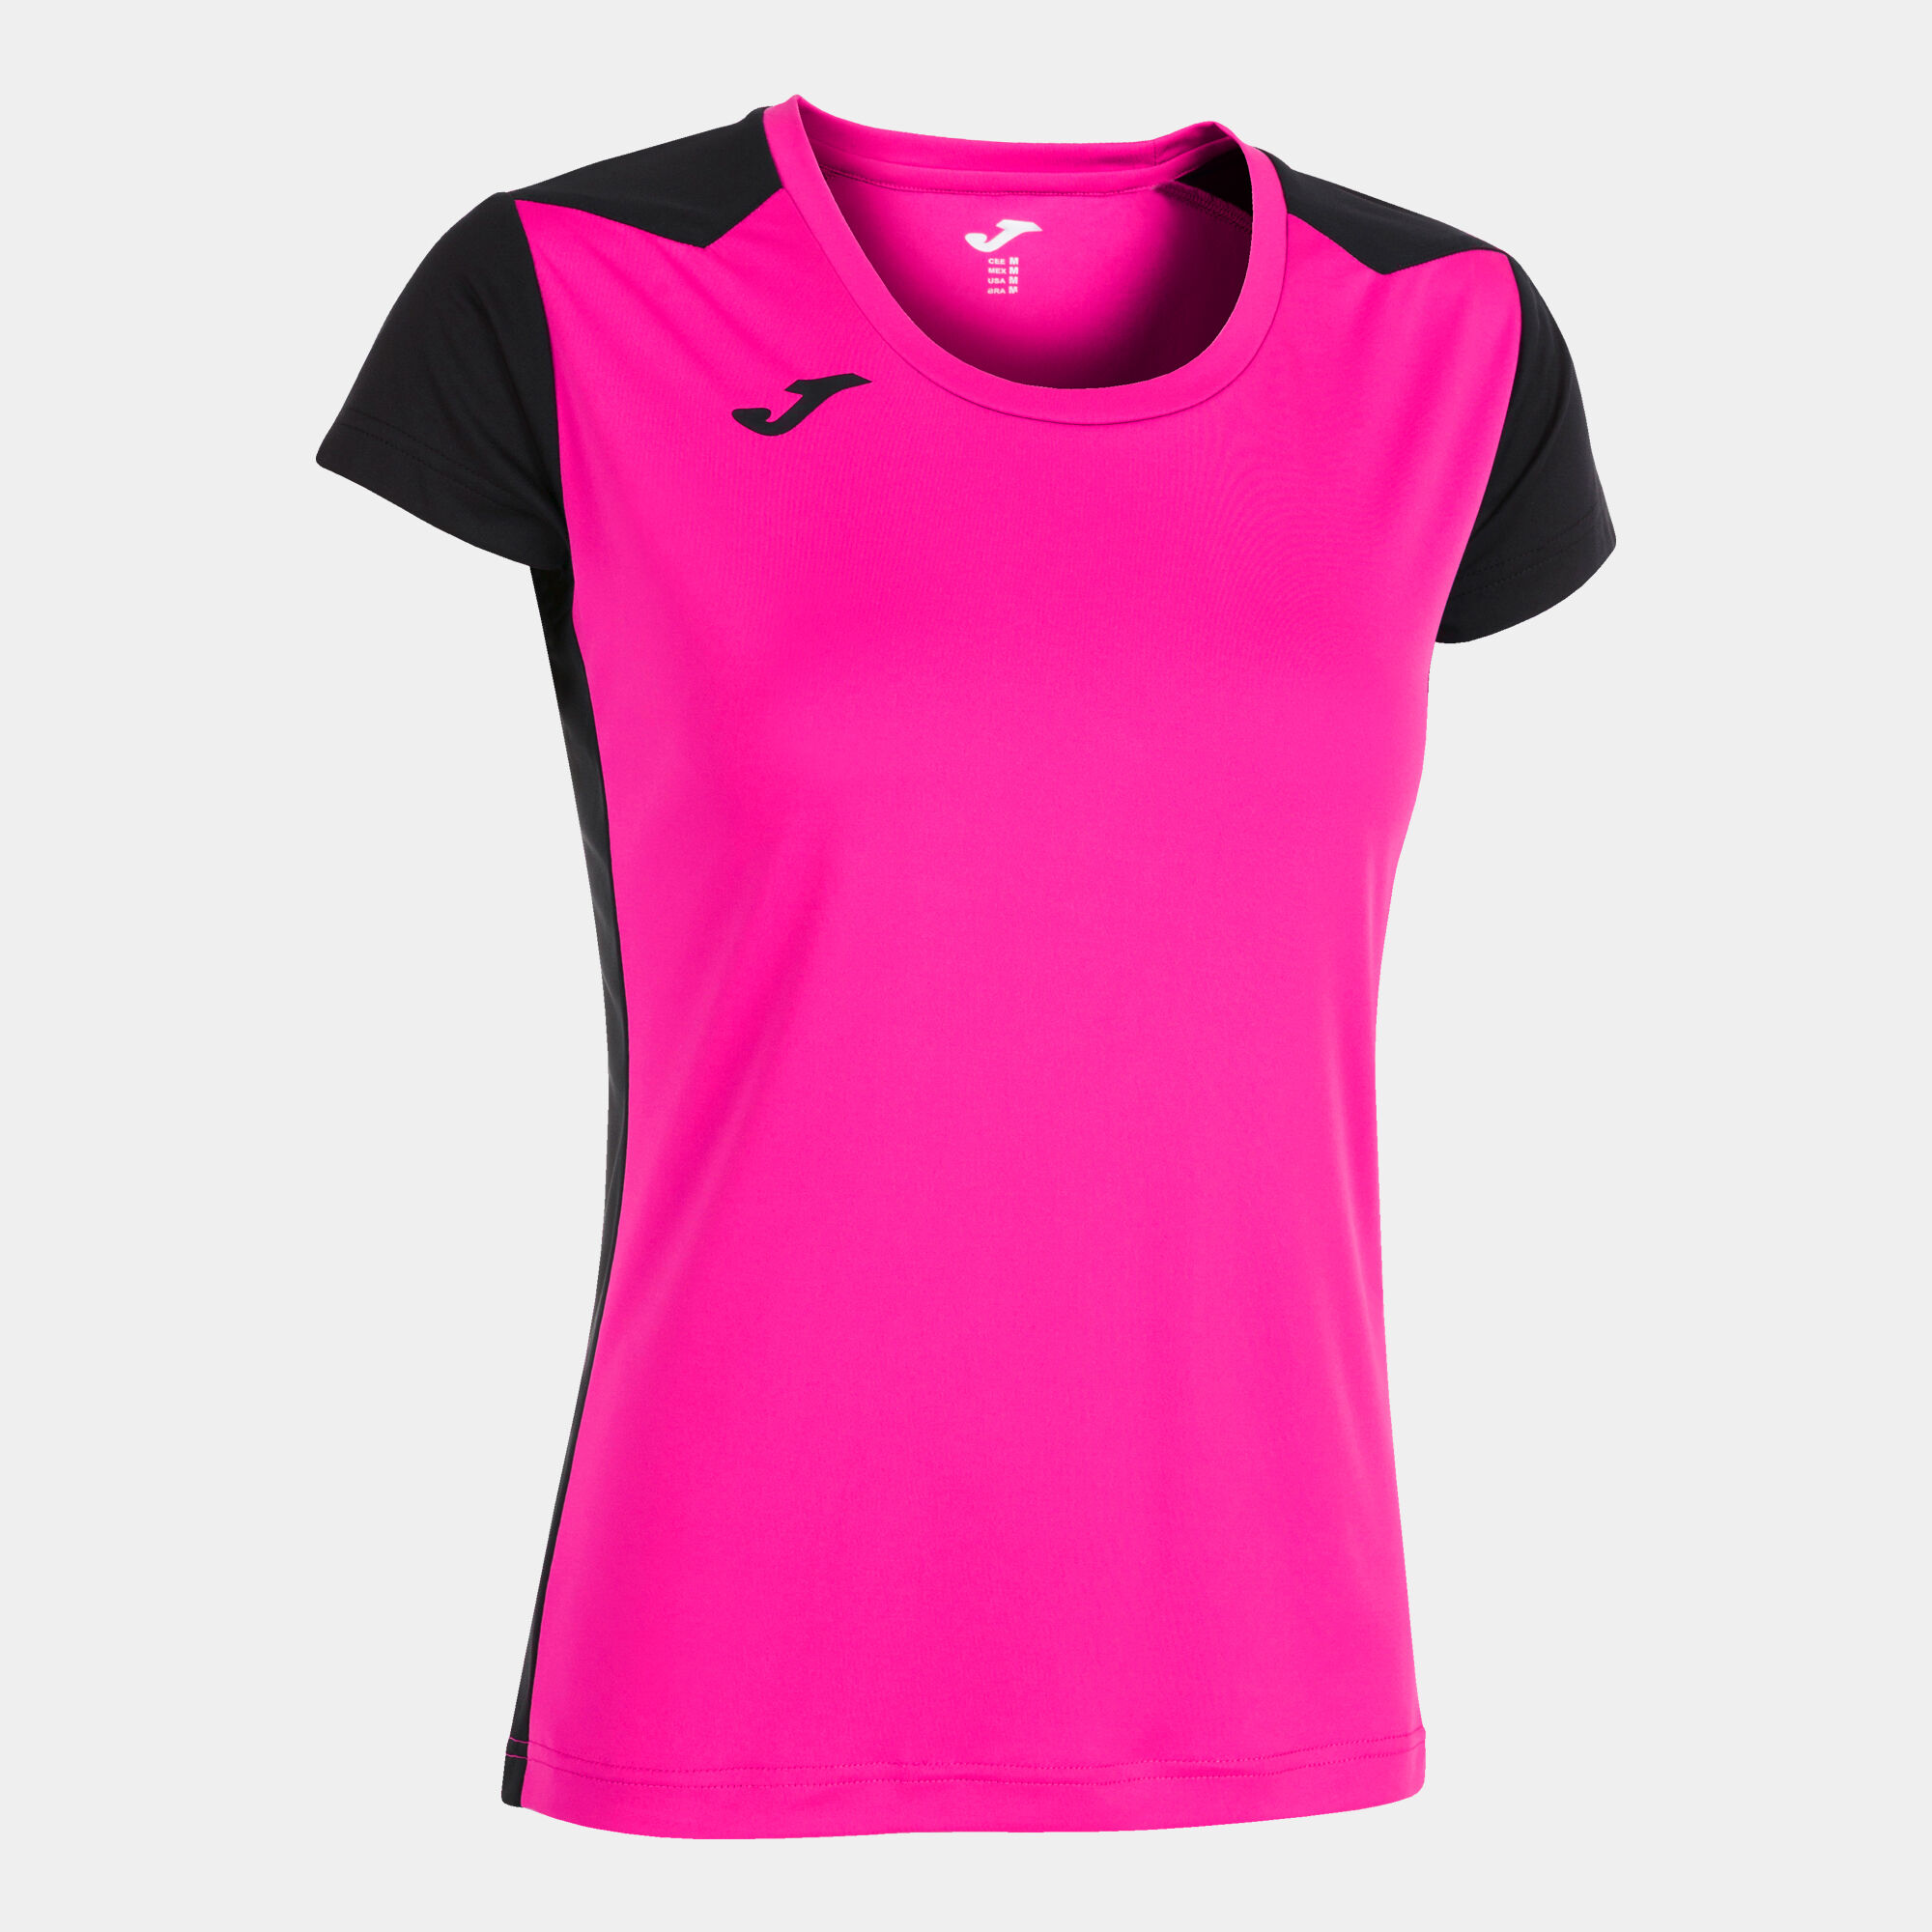 MAILLOT MANCHES COURTES FEMME RECORD II ROSE FLUO NOIR